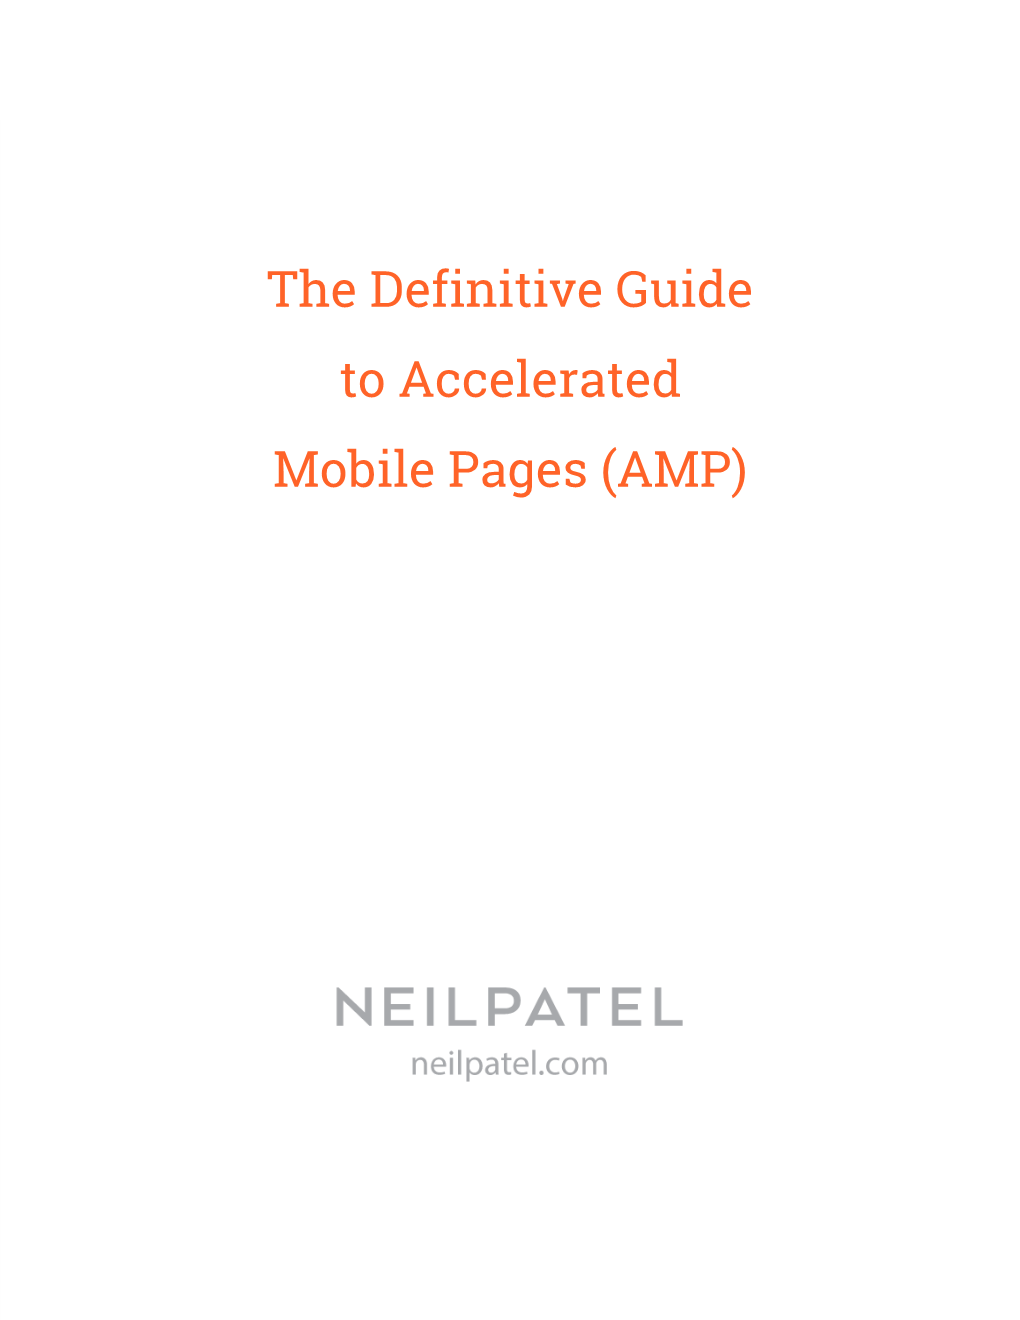 The Definitive Guide to Accelerated Mobile Pages (AMP)